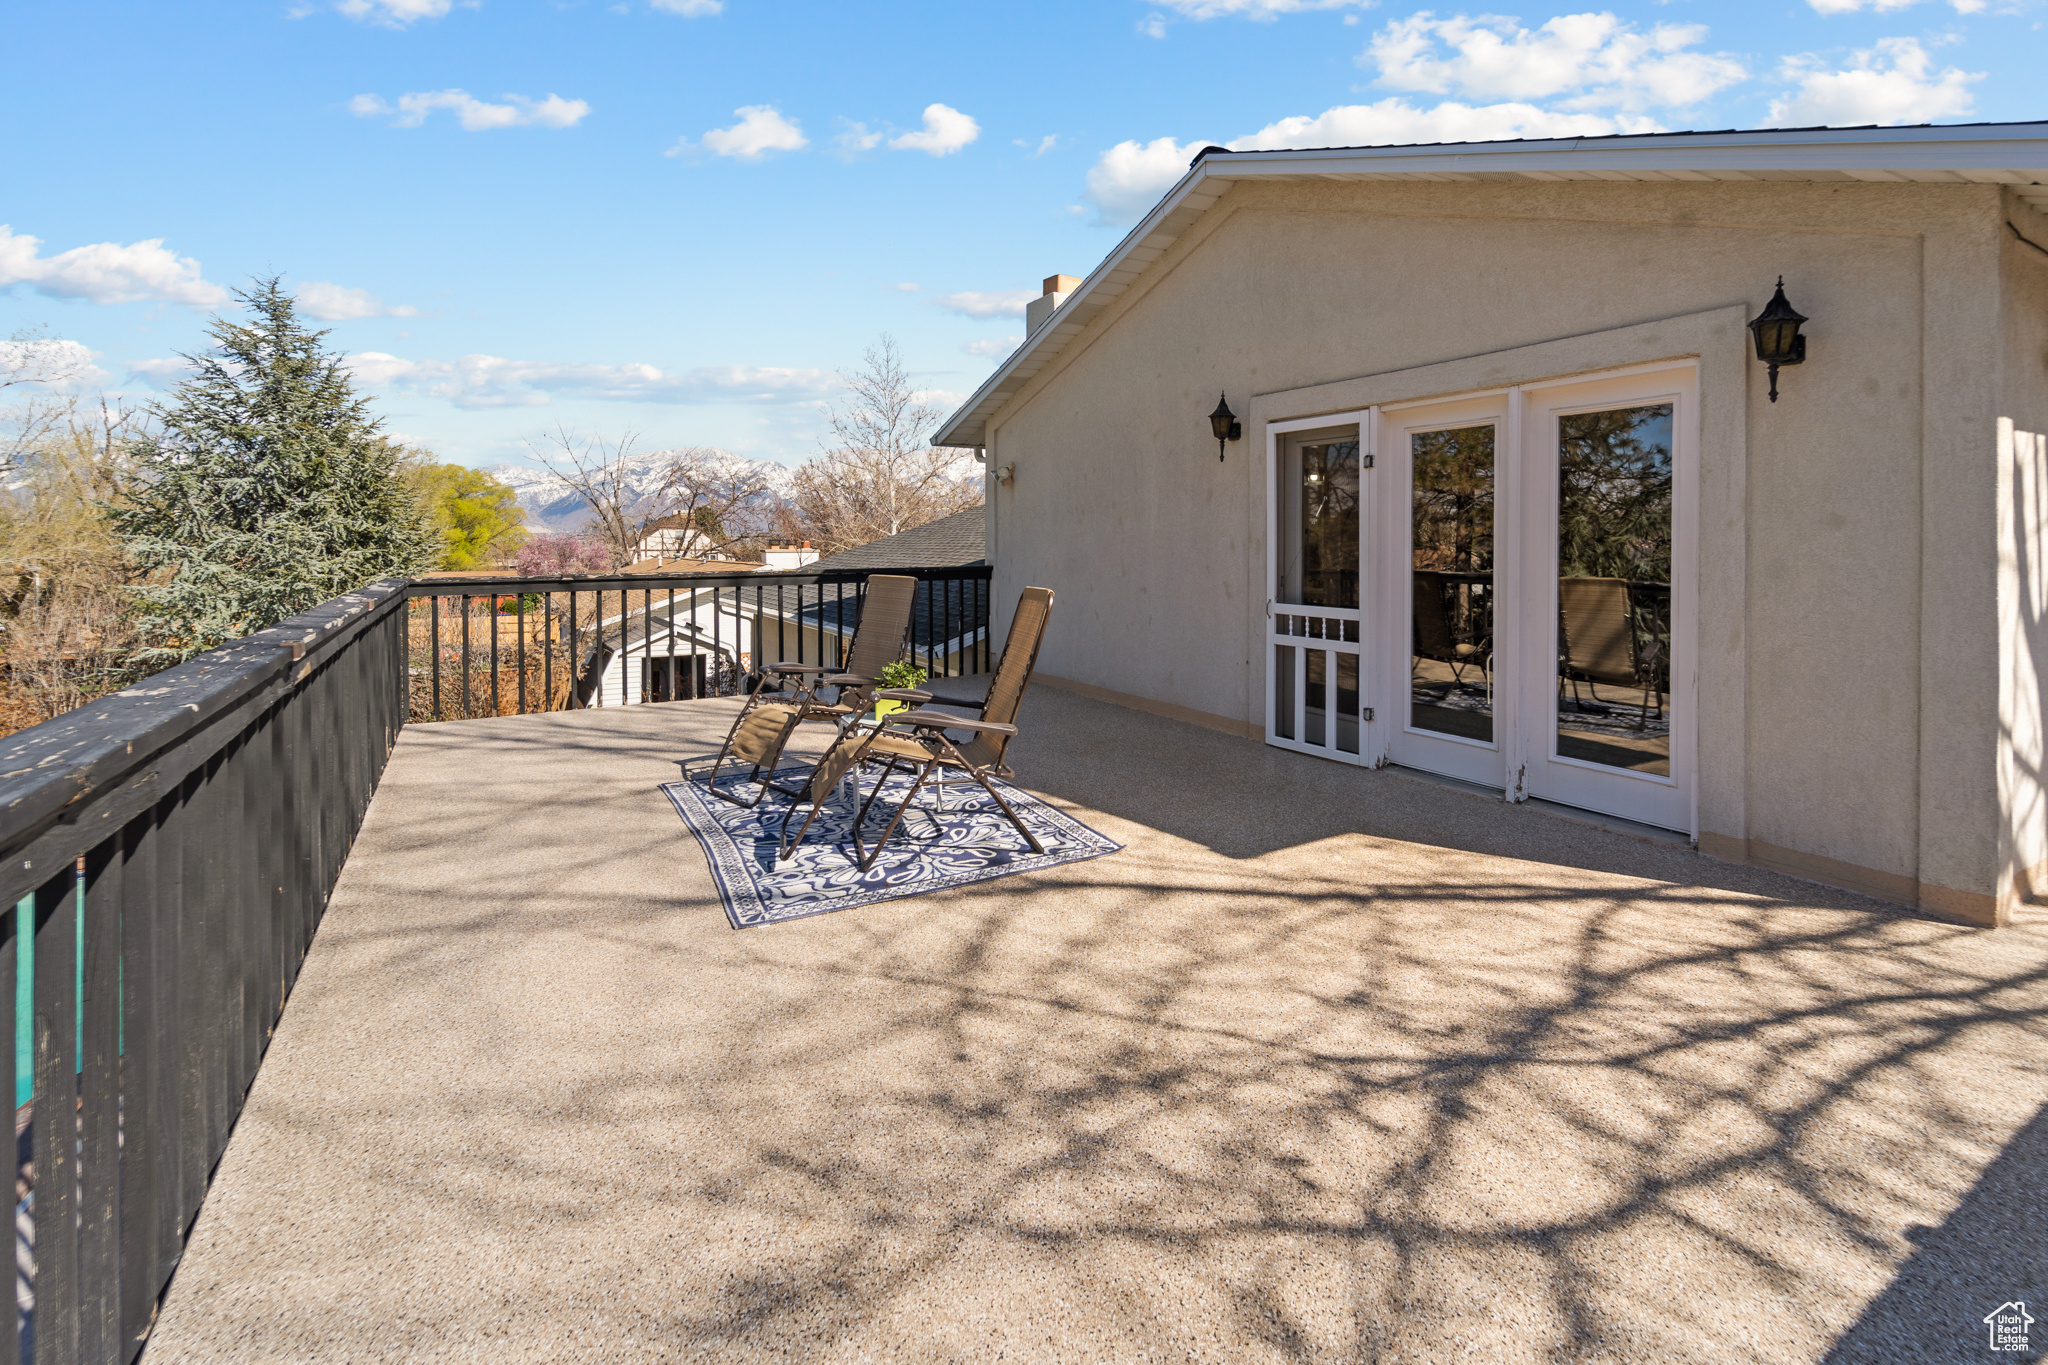 Primary Bedroom deck. Views of the beautiful mountains, park like back yard and pool.